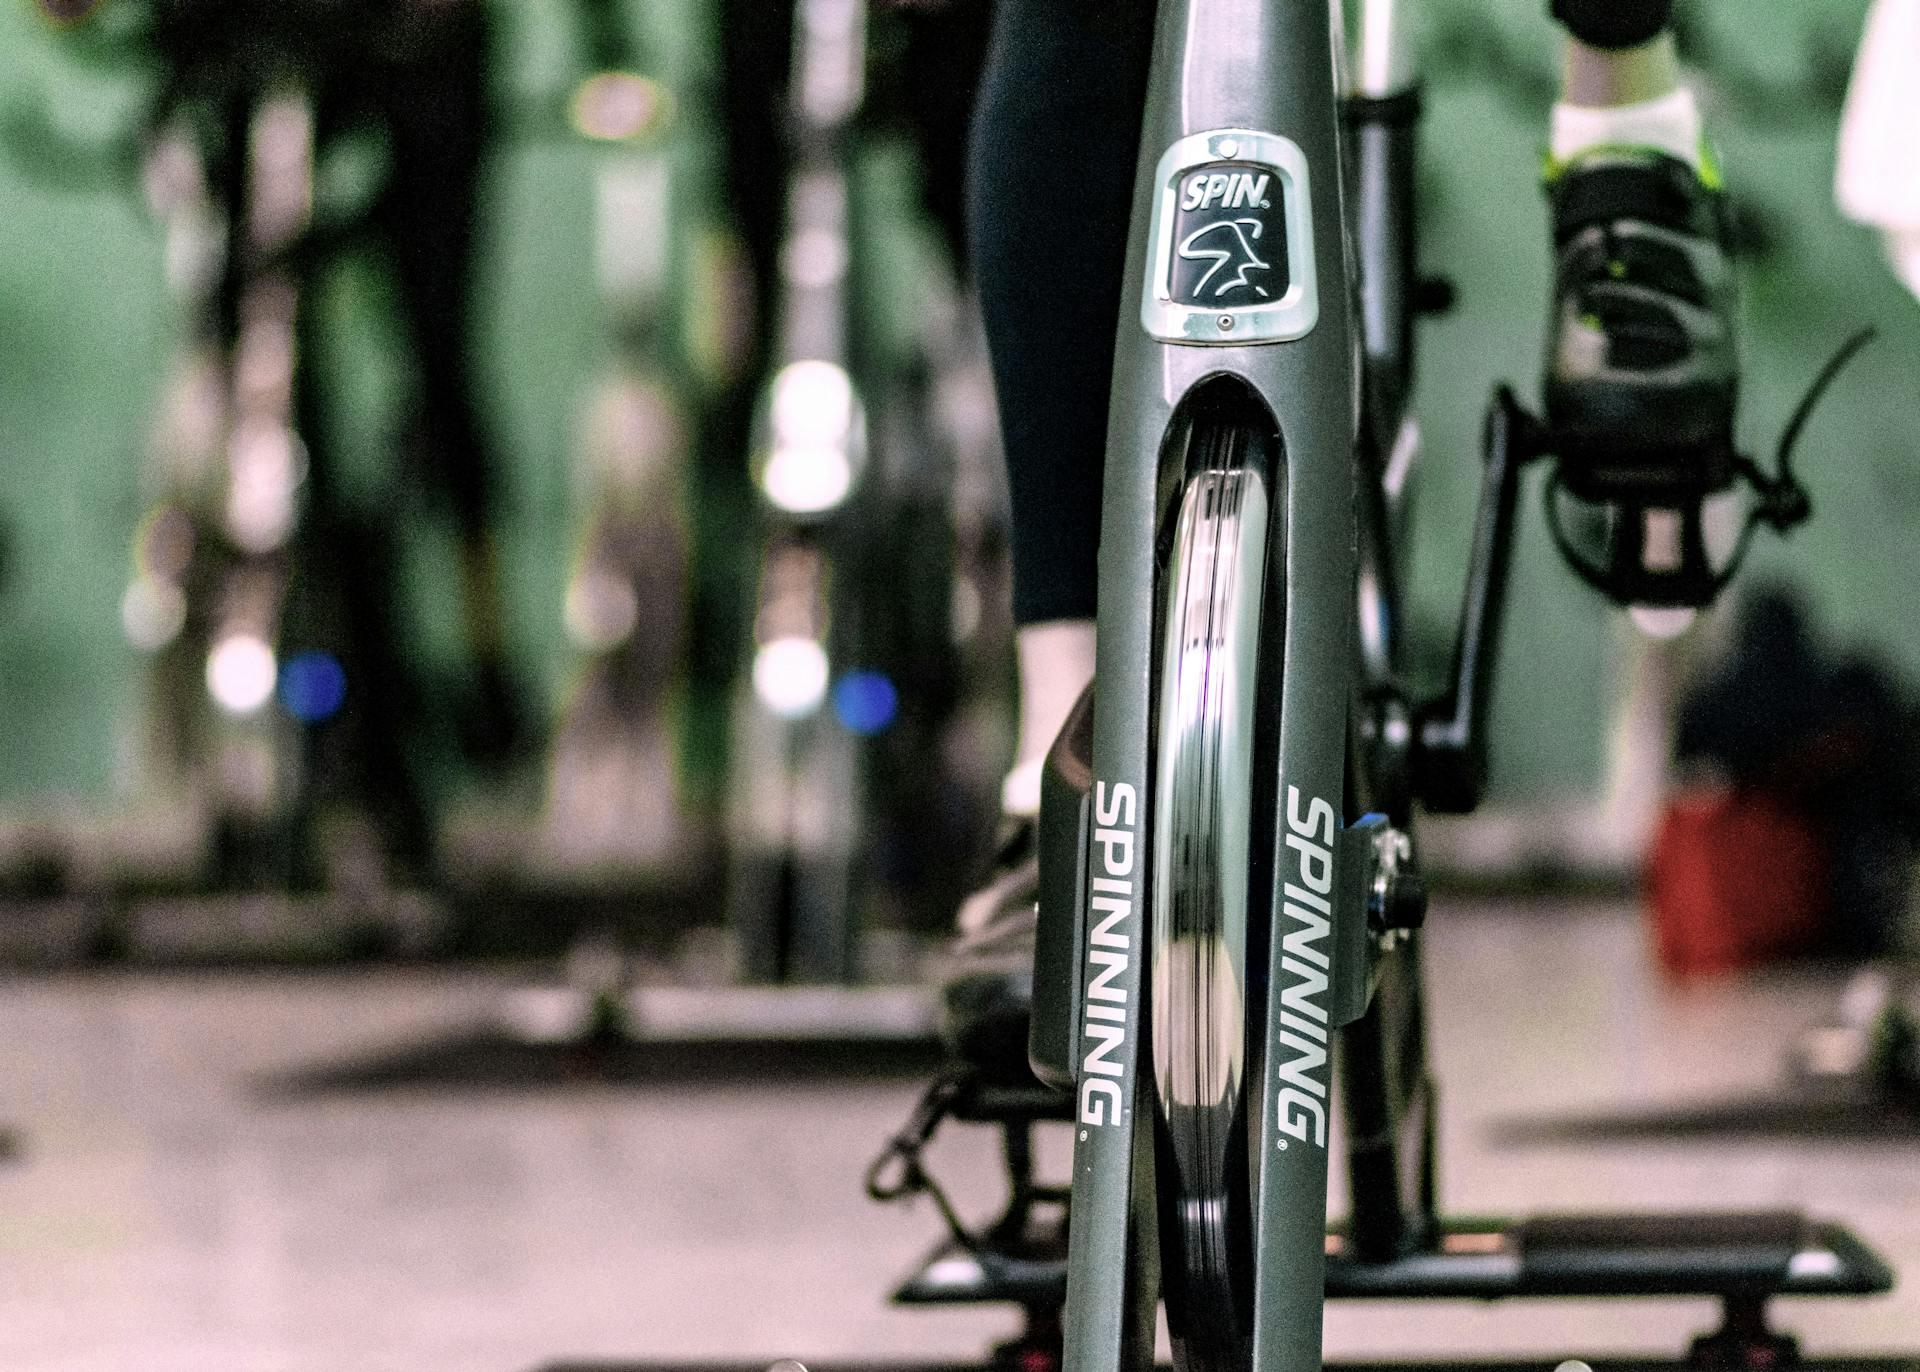 /fitness/Spin/new orleans athletic club-equipment-spin bike-word-microshot.jpg